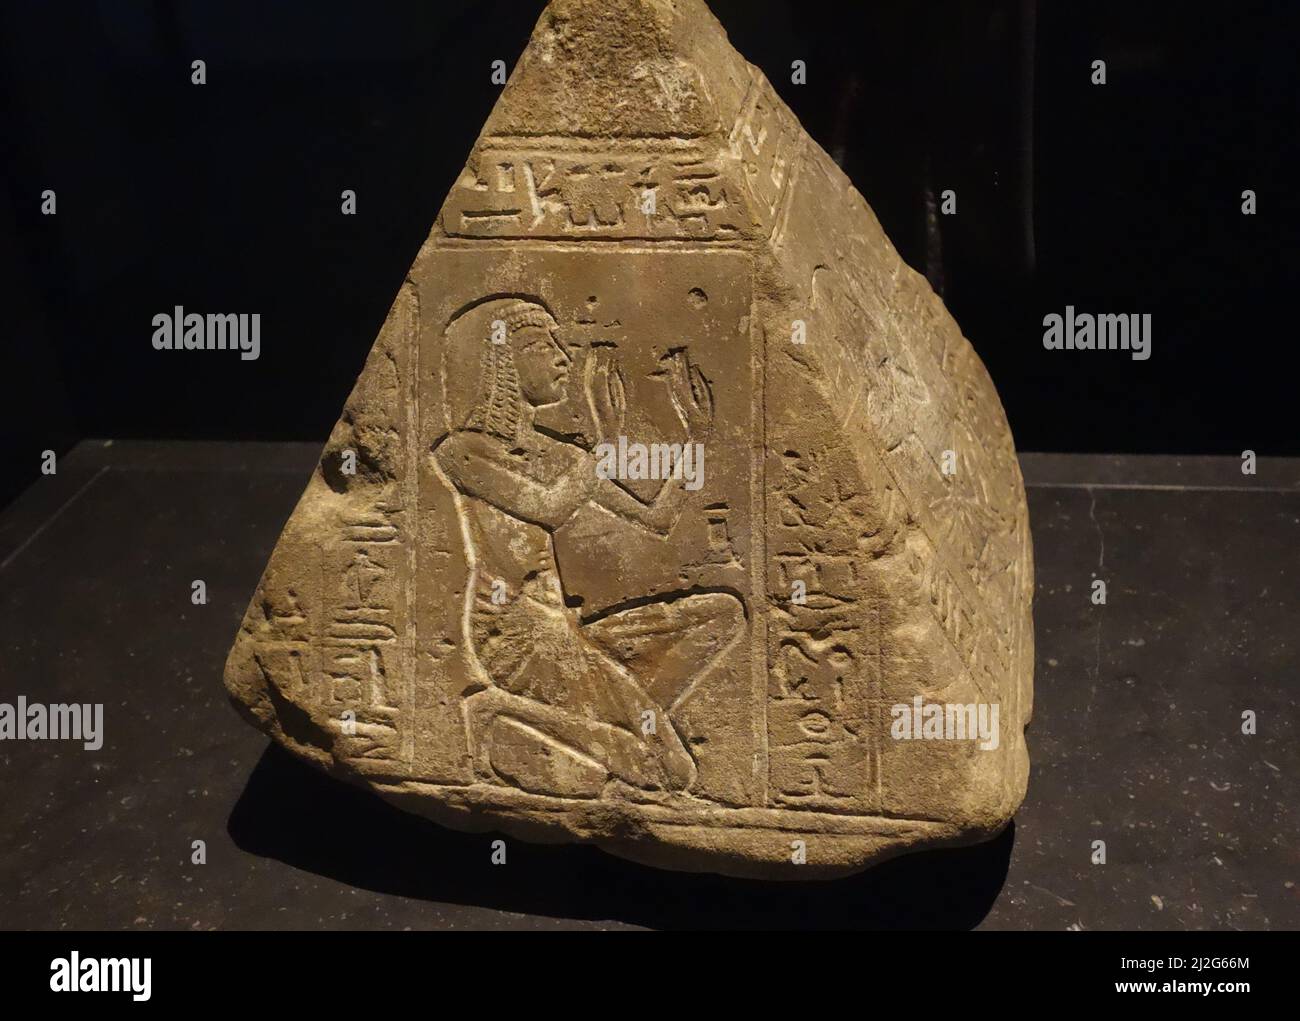 Pyramidion with the name of Huy, deceased shown in adoration. Exhibition in Louvre Abu Dhabi Stock Photo